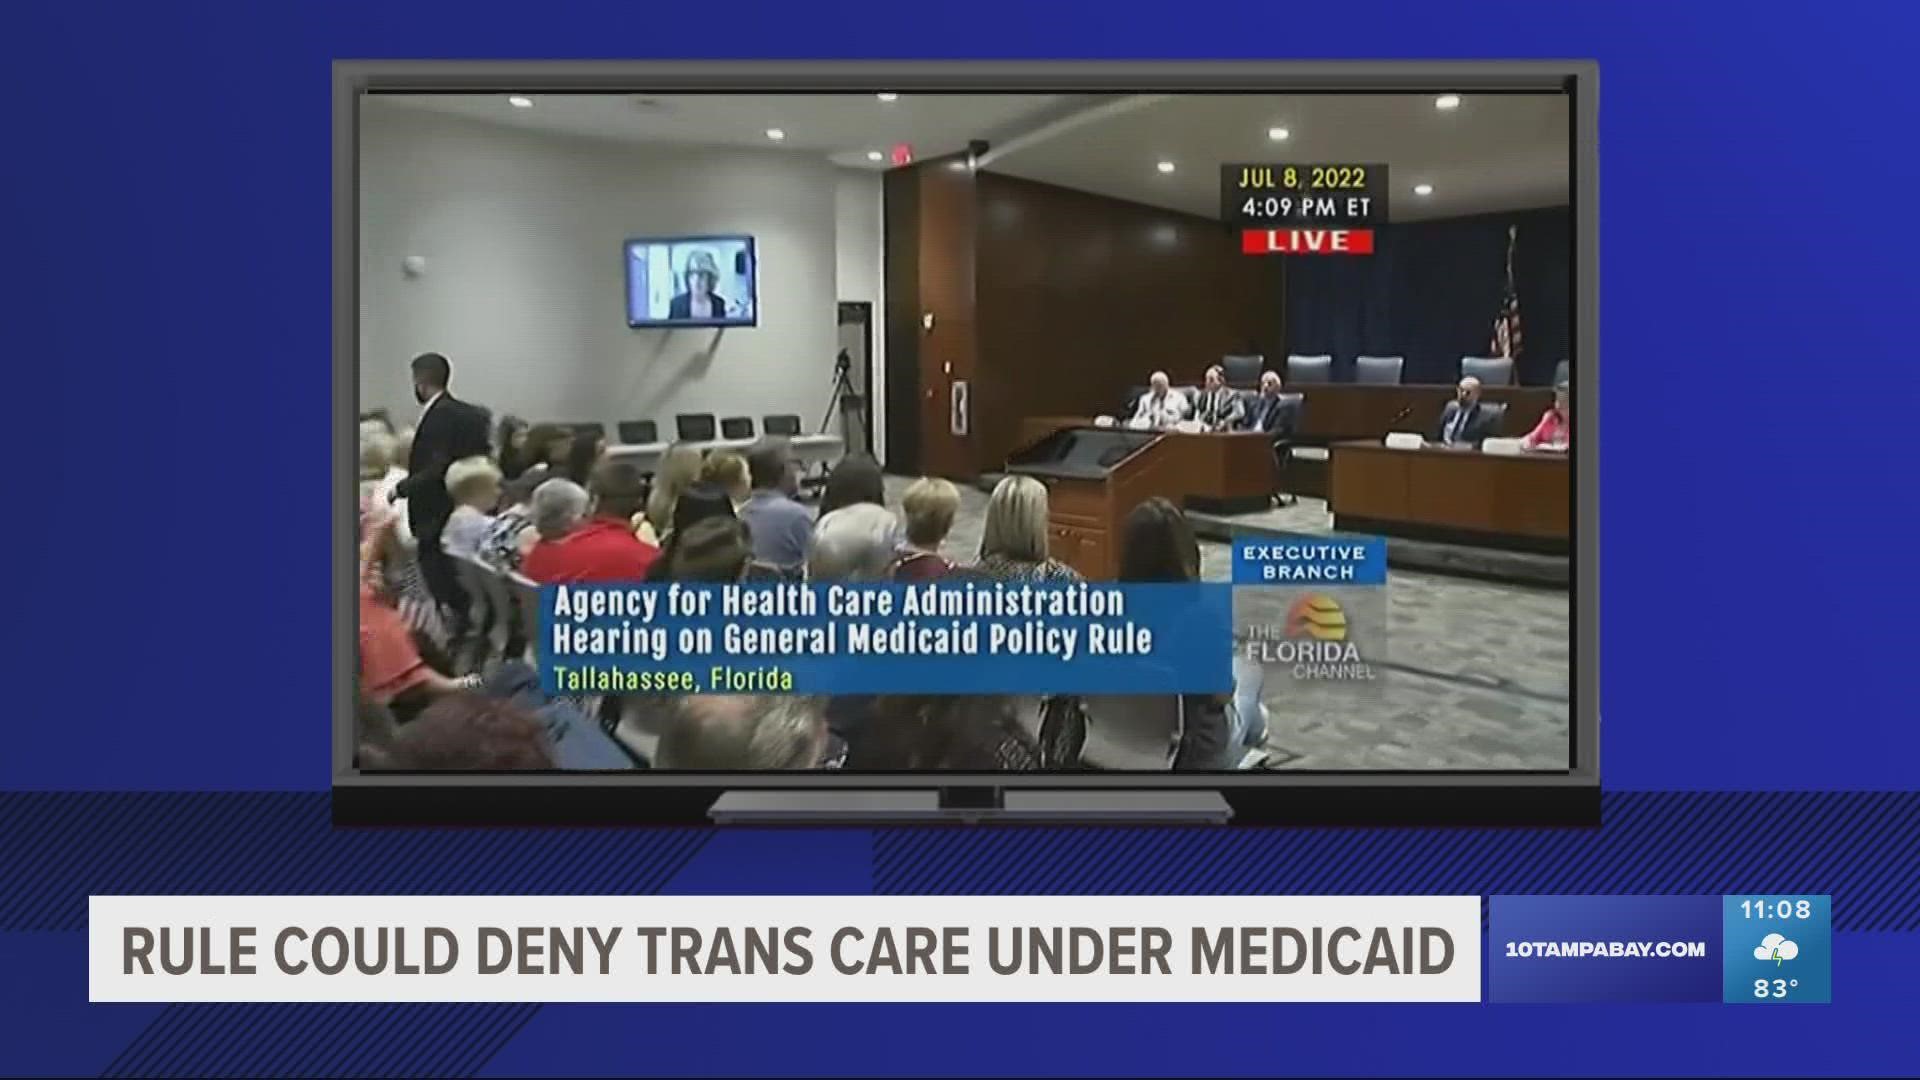 Florida's Agency for Health Care Administration (AHCA) held a hearing in Tallahassee. LGBTQ groups condemn the proposed rule change.